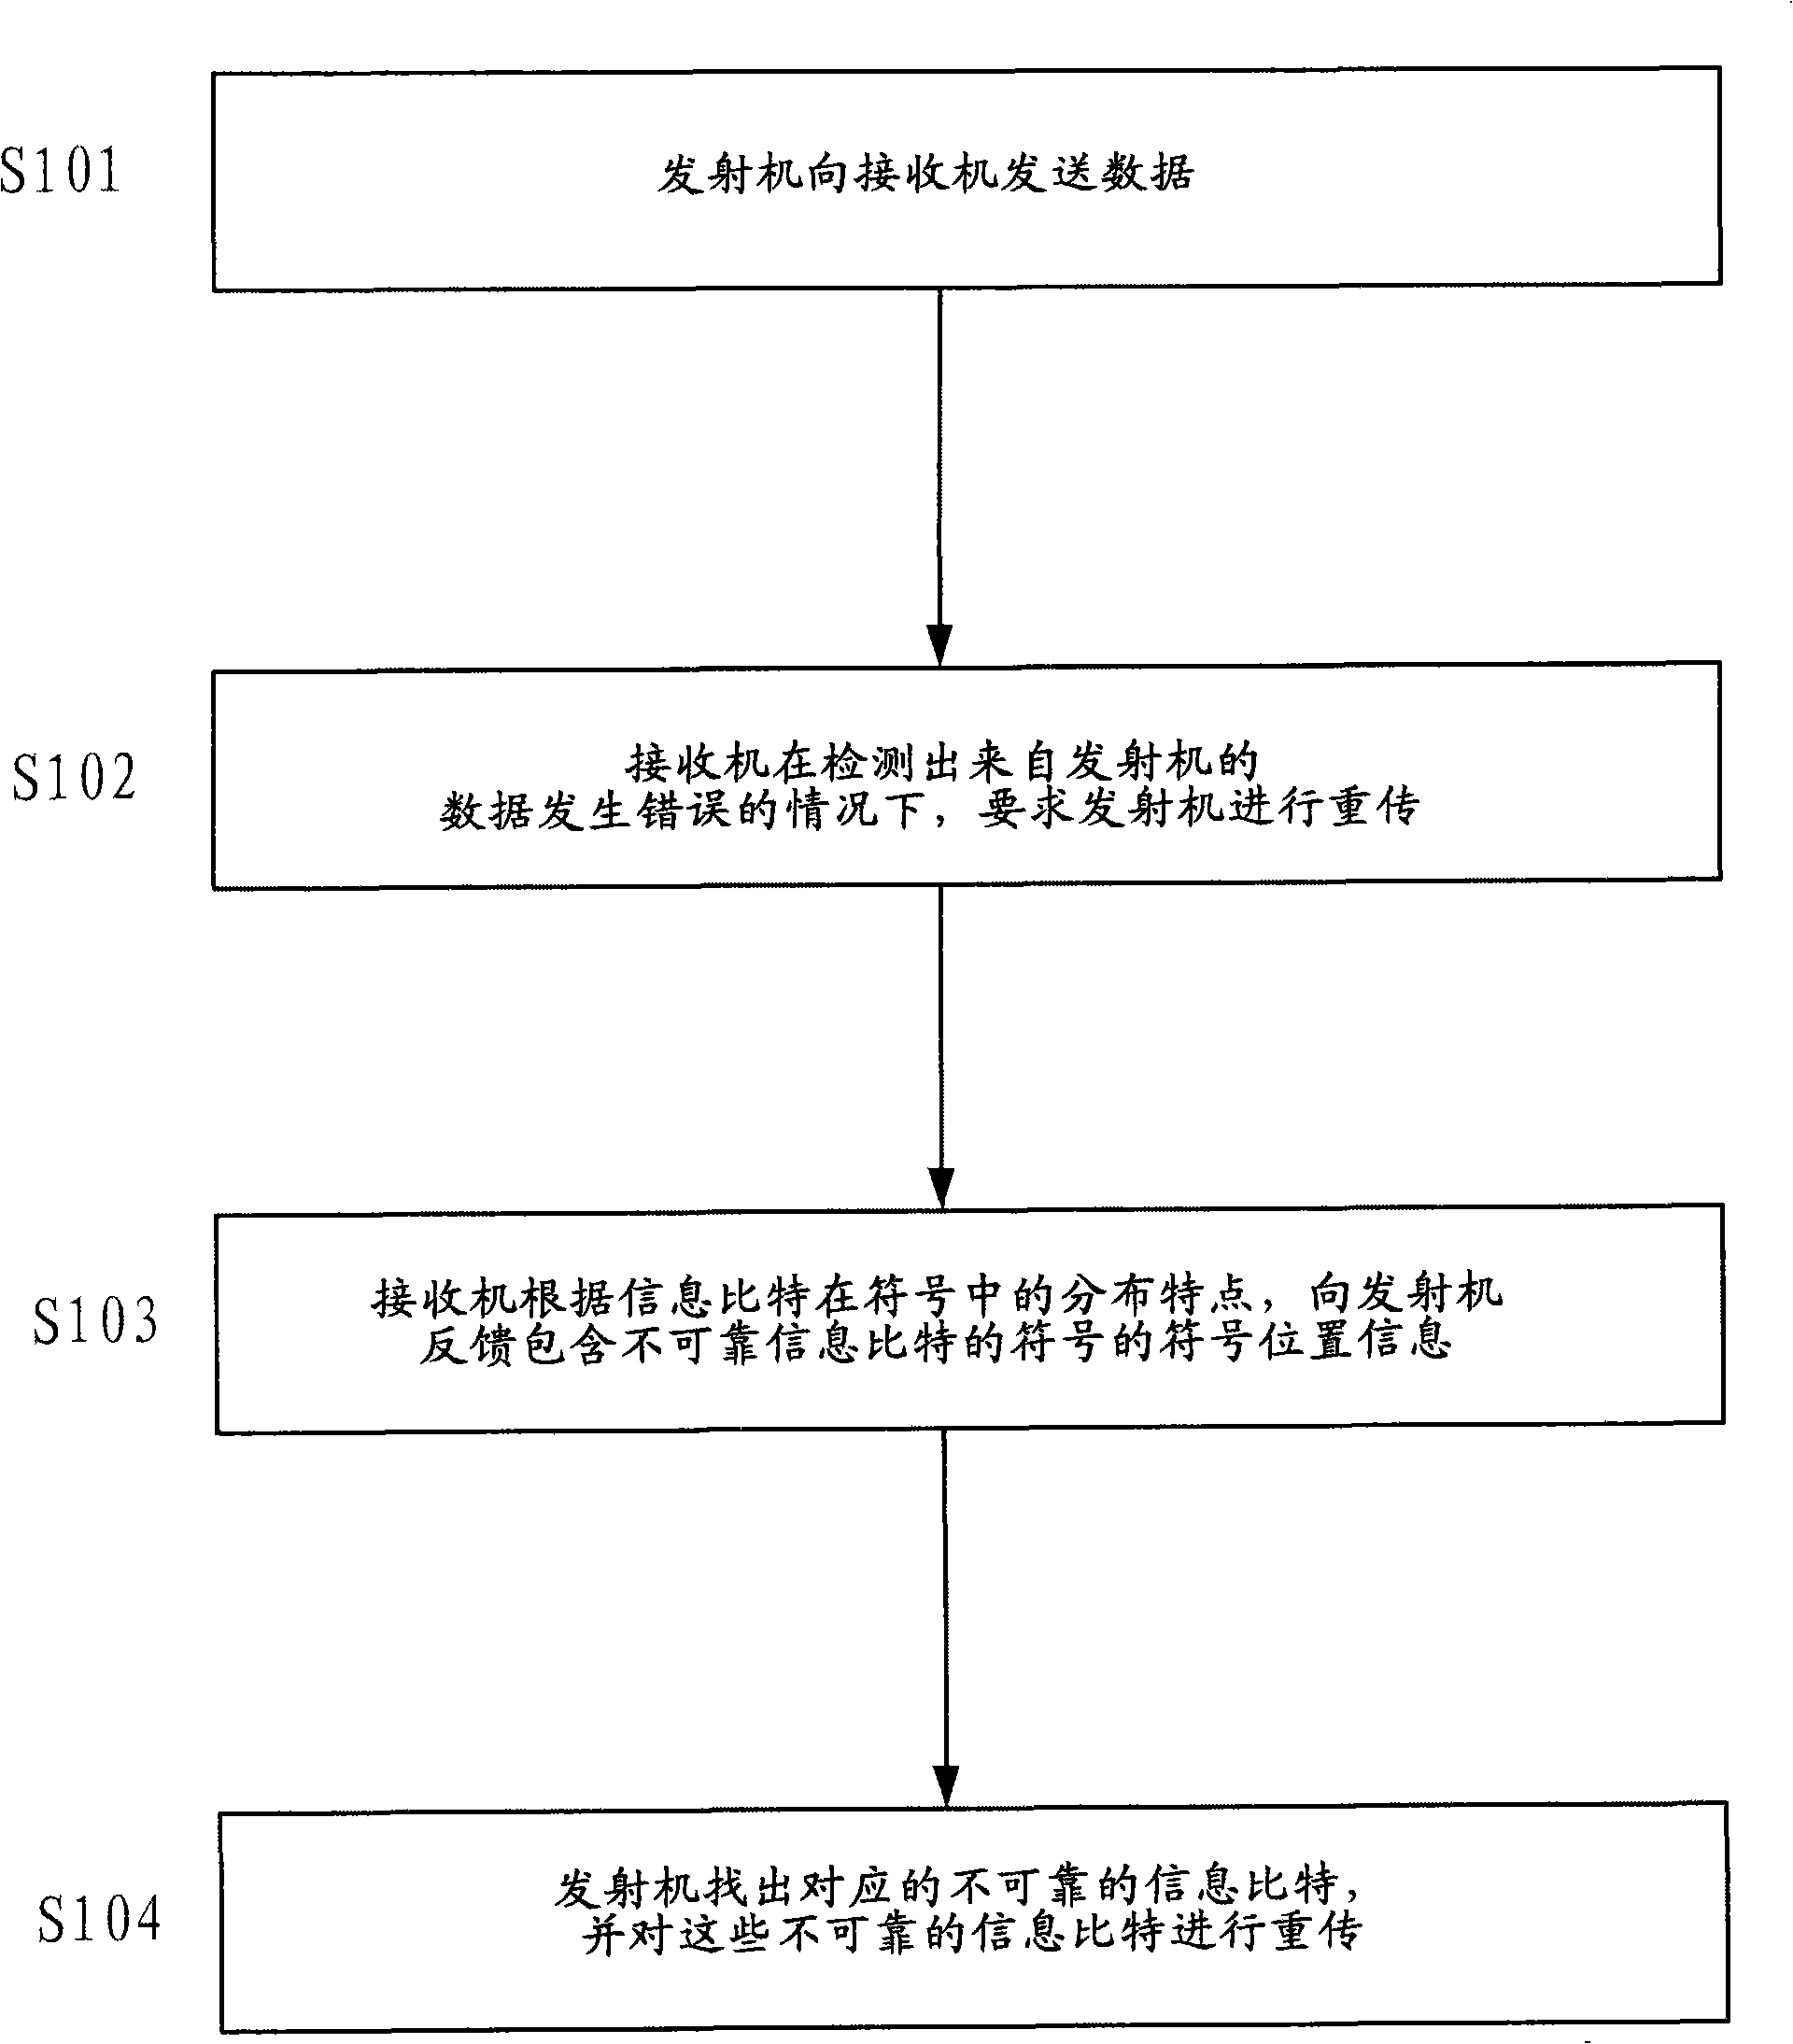 Hybrid automatic request retransmission method, transmitter, receiver and communication system